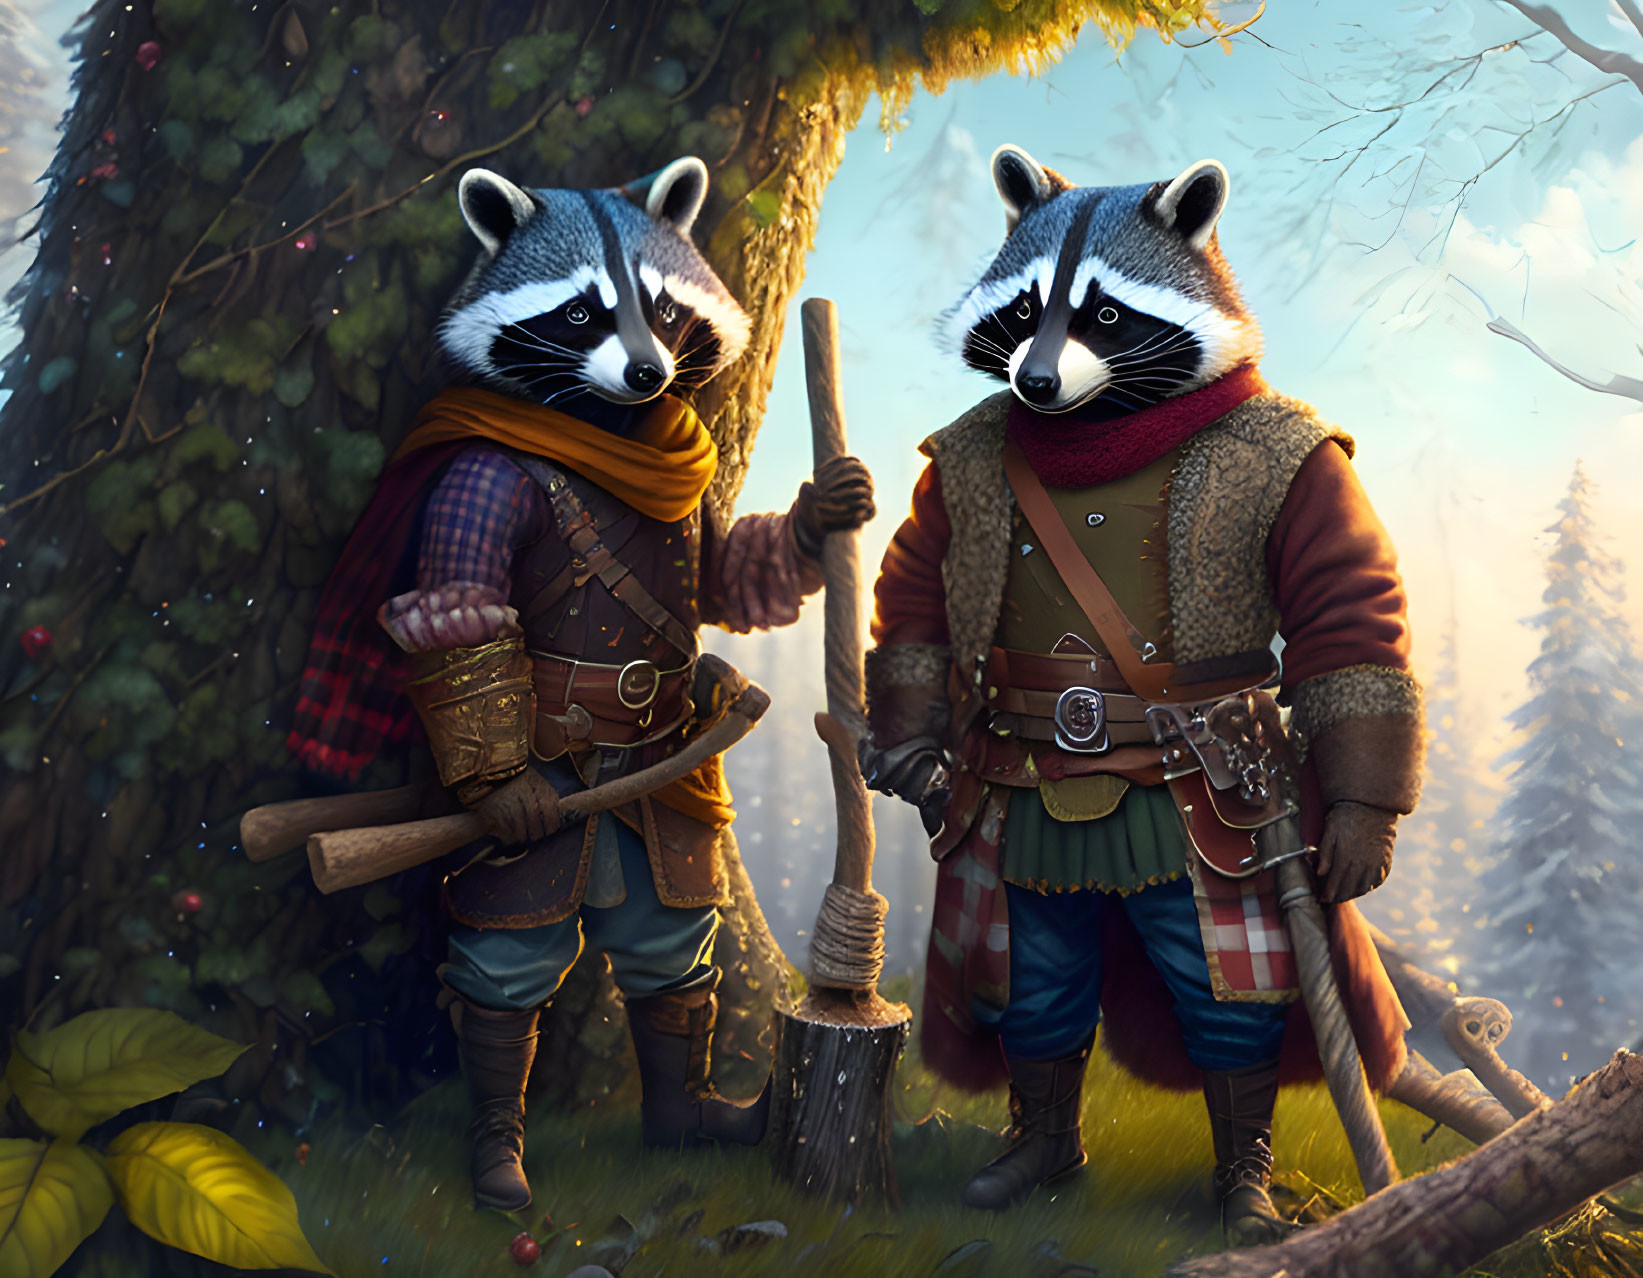 Anthropomorphic raccoons in medieval attire with ax and walking stick